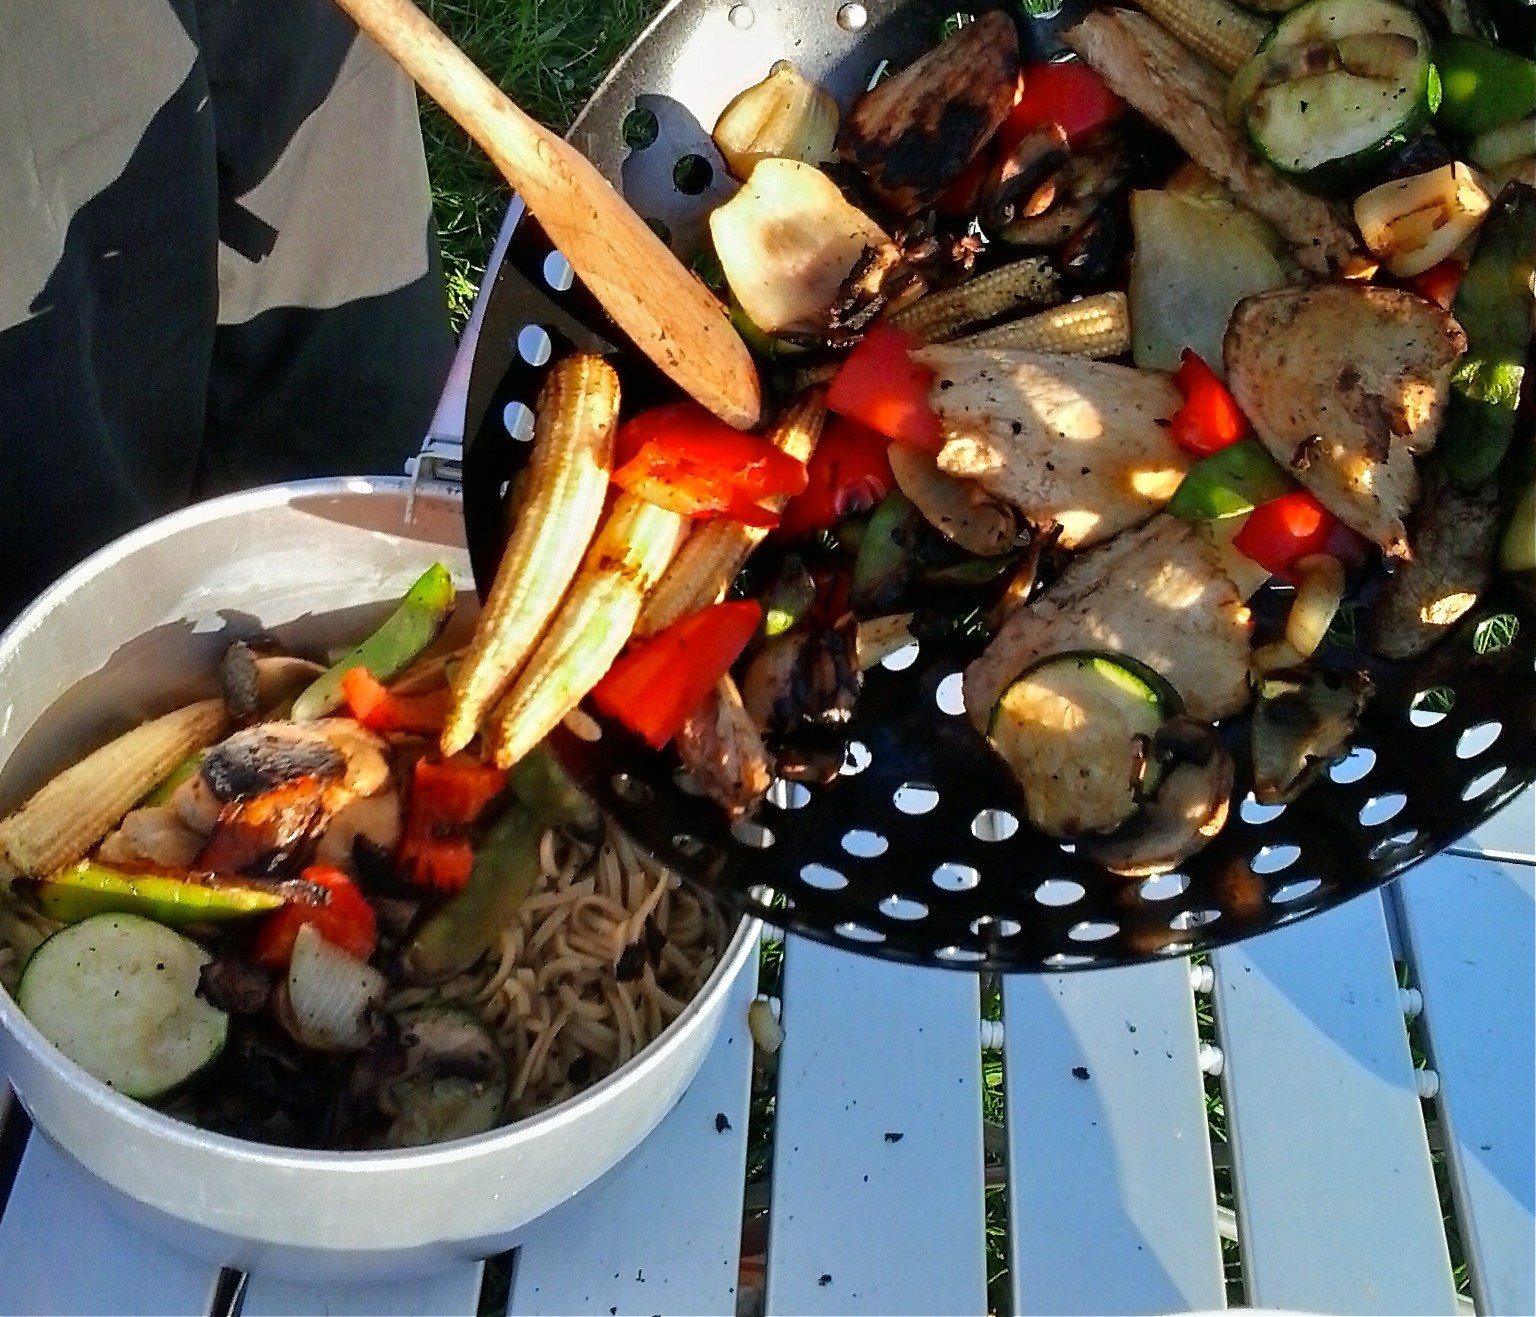 The finished stir-fry from cooking over the campfire